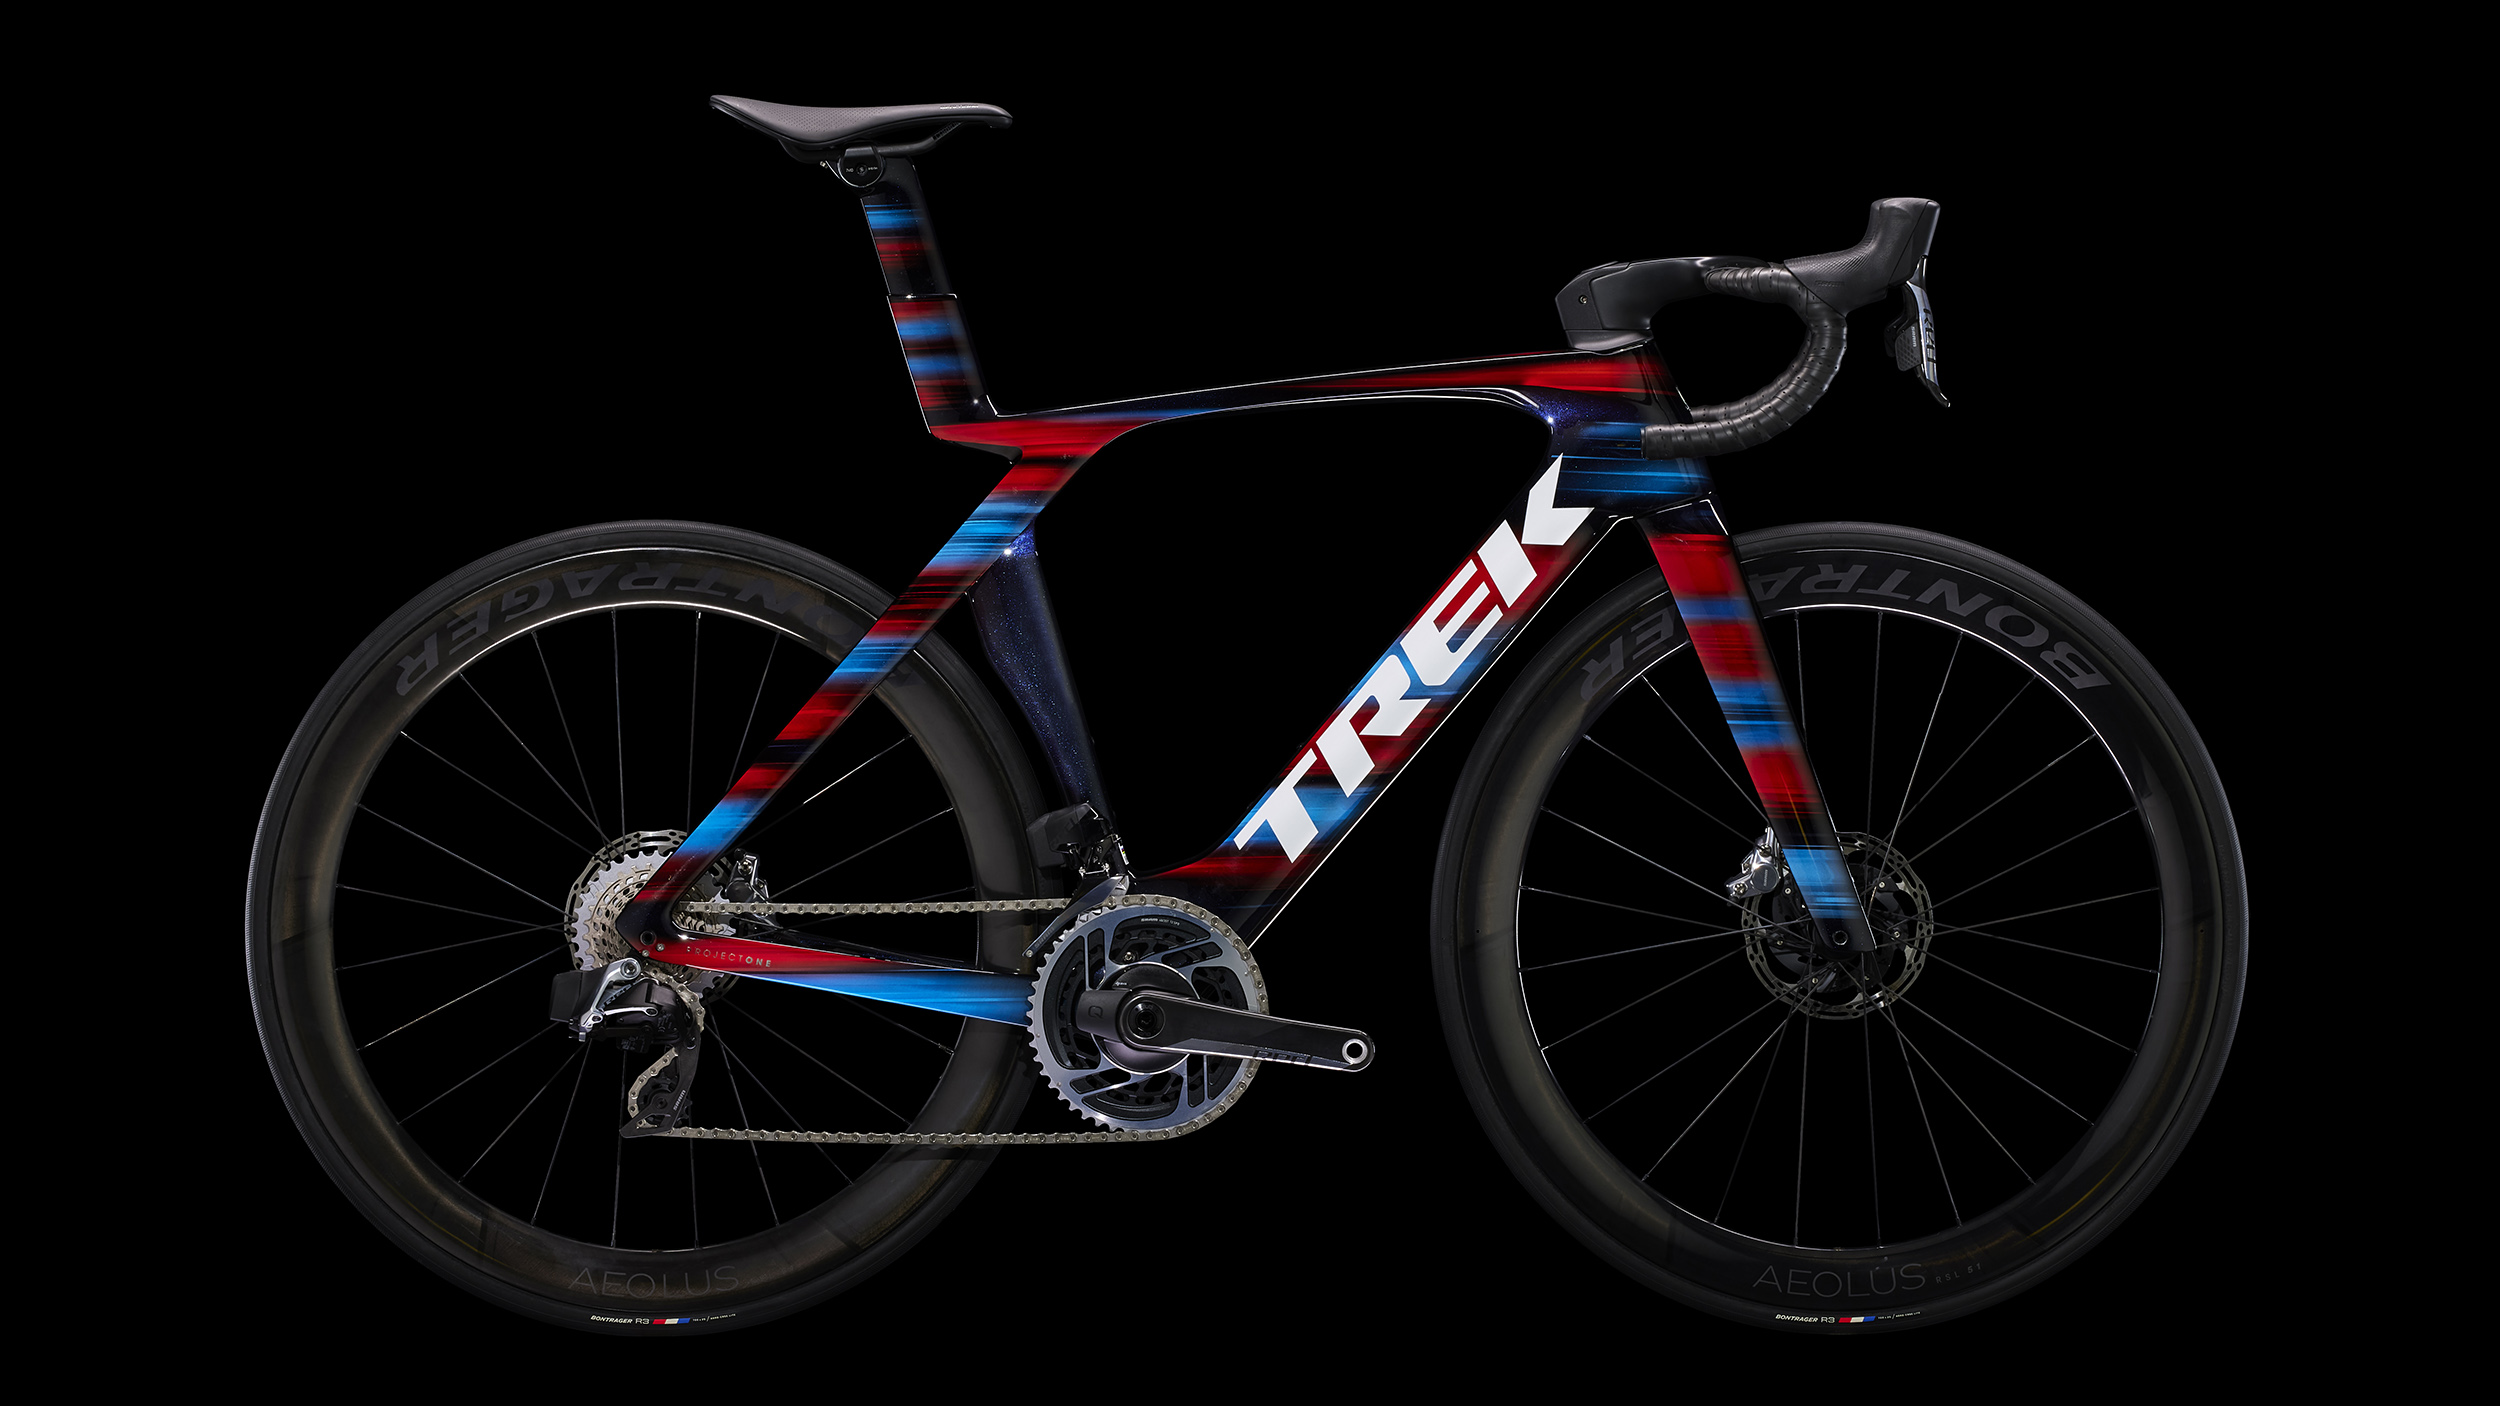 a red, blue, and black striped bike against a black background